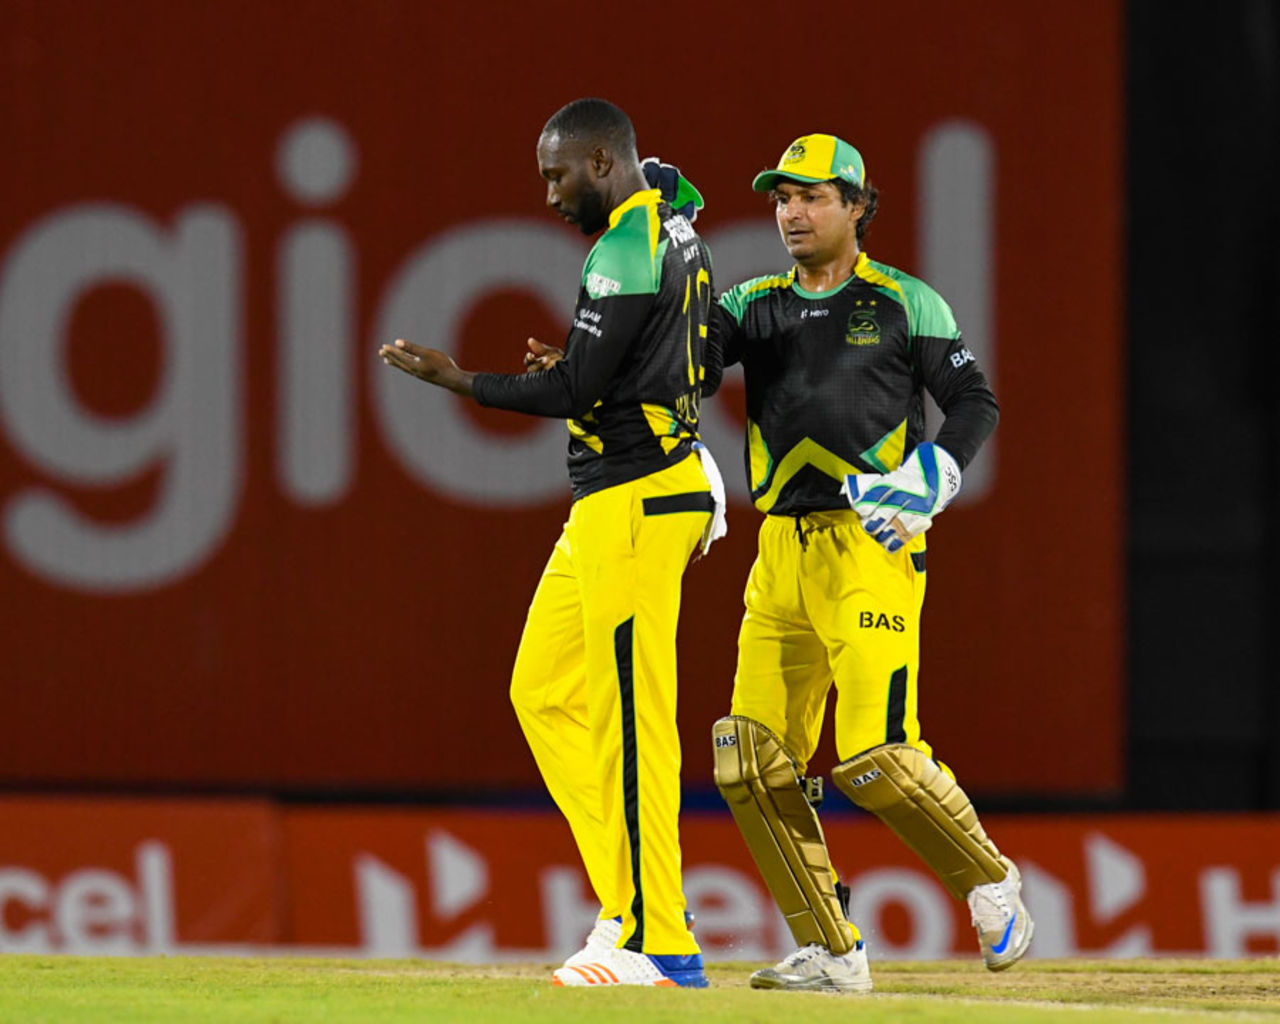 Kesrick Williams brings out his celebratory notebook, T&T Riders v Jamaica Tallawahs, CPL 2017, Port of Spain